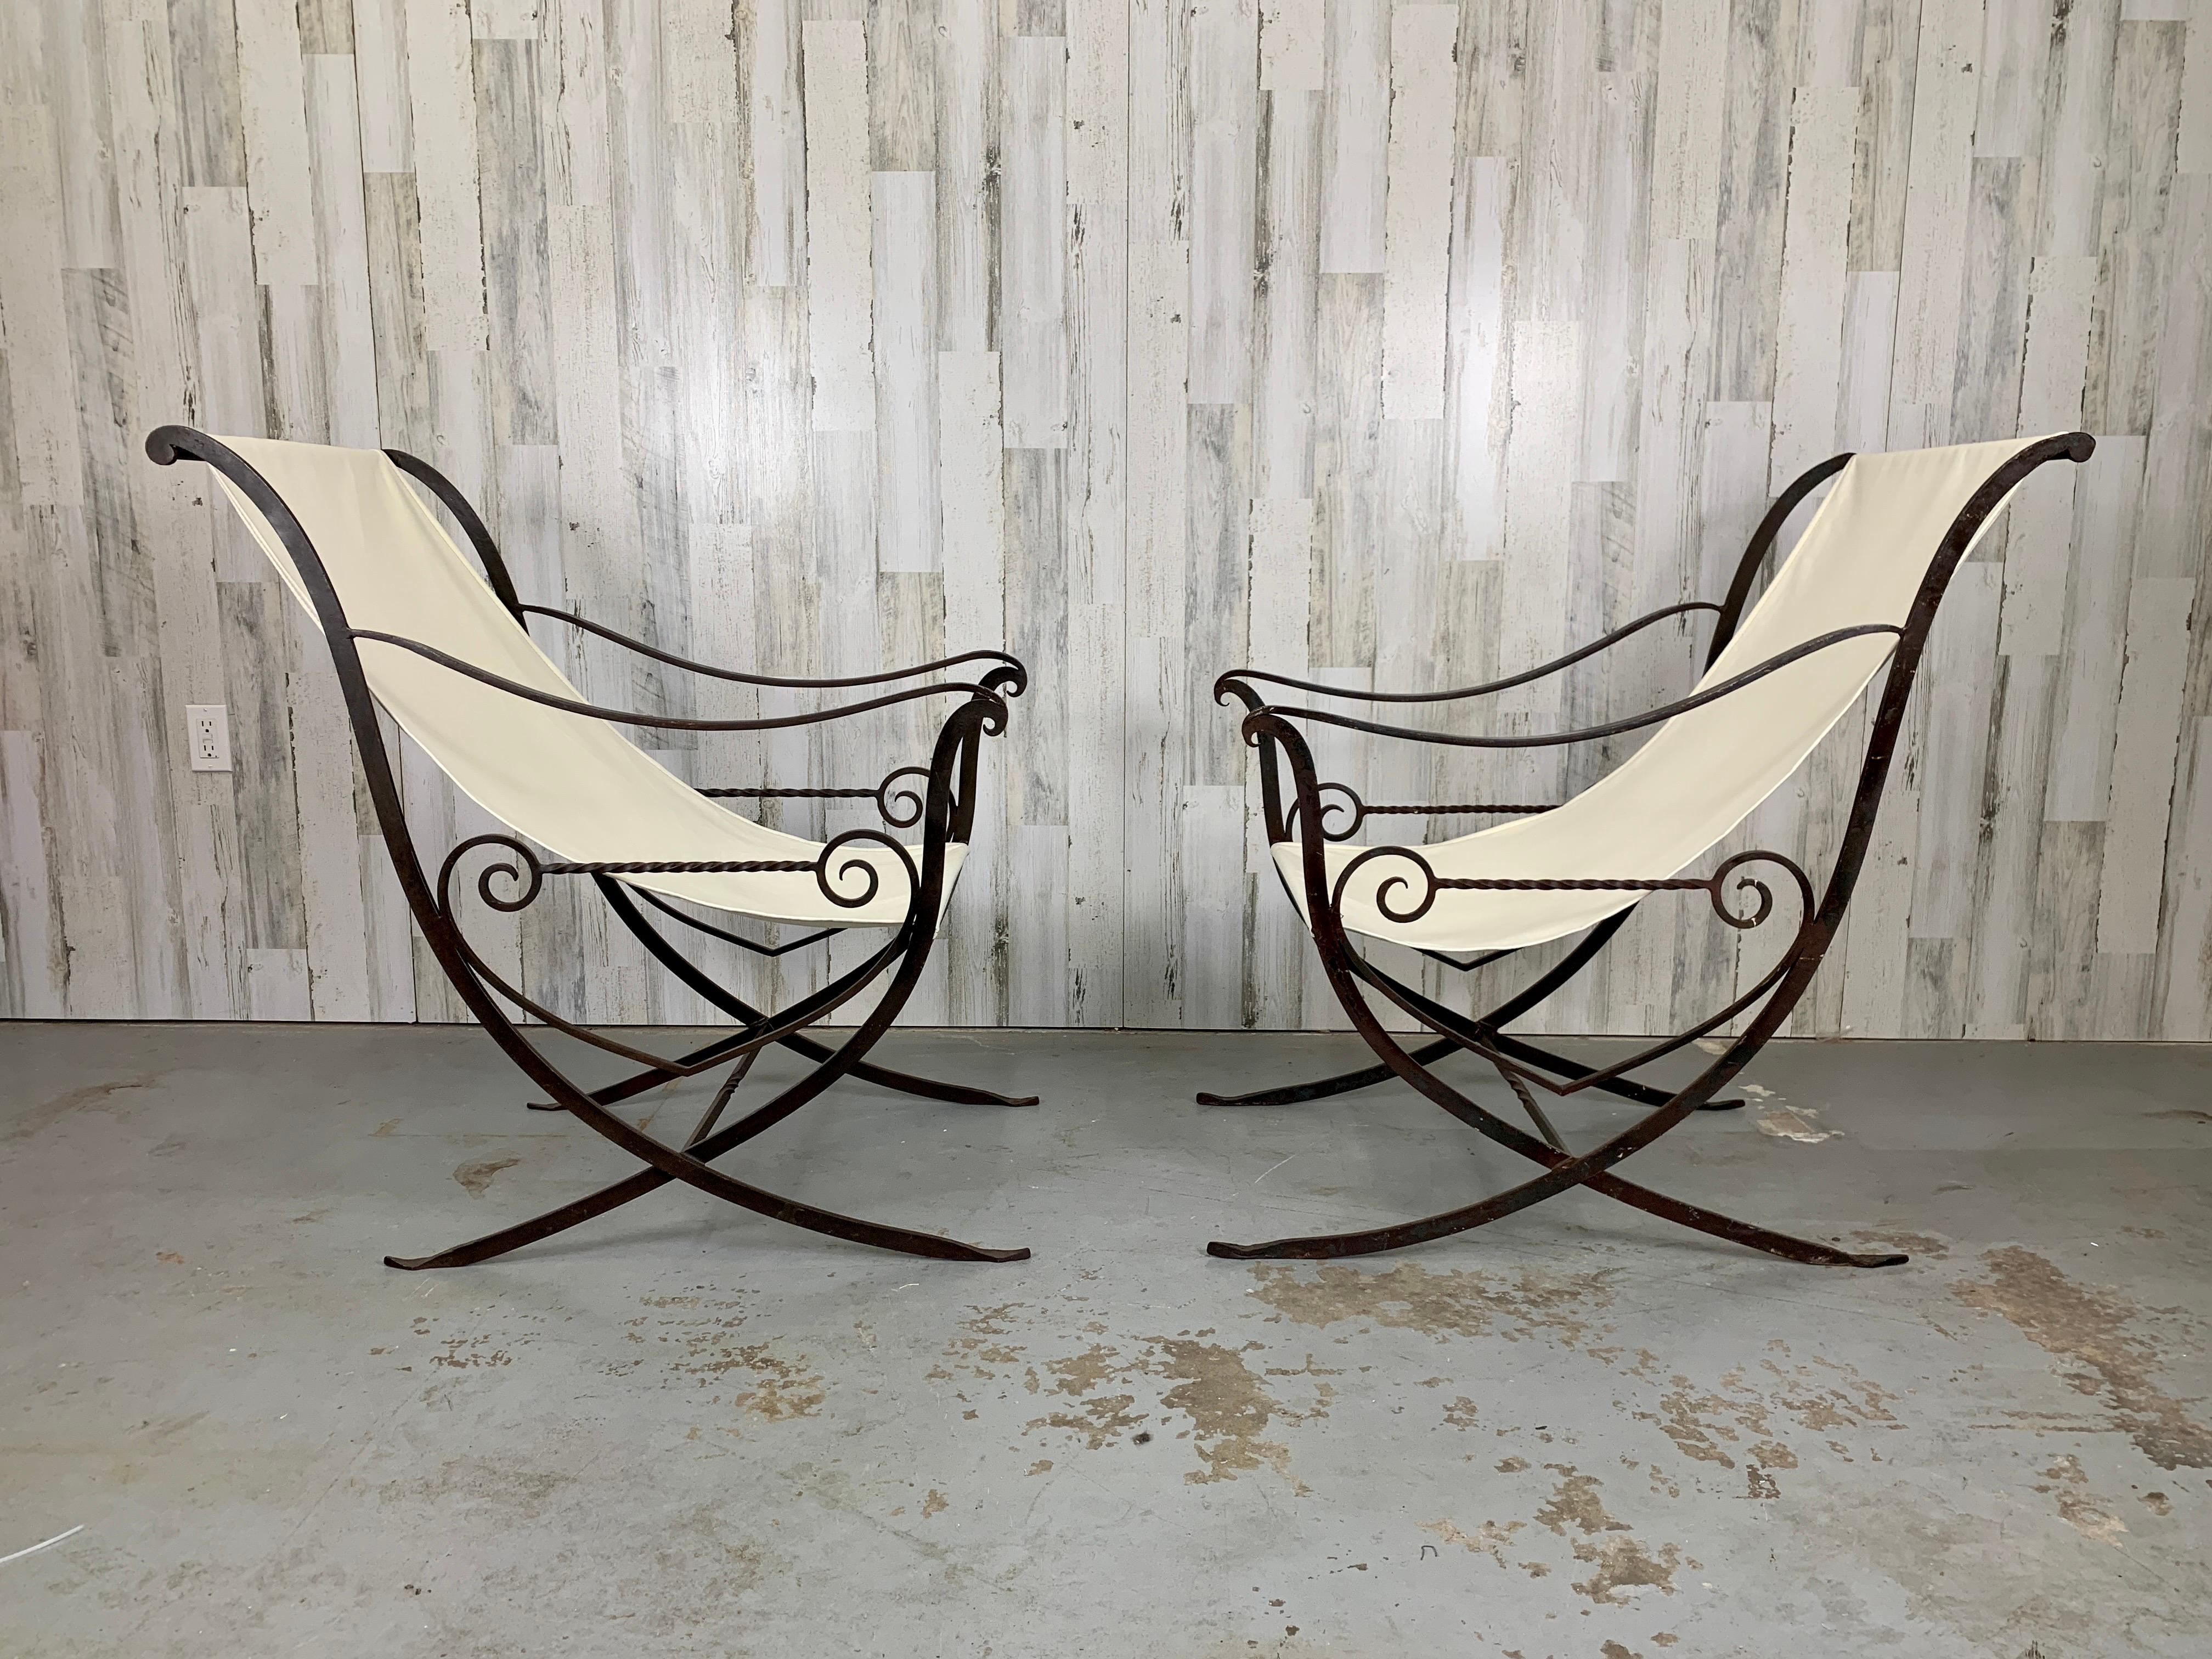 Sculpted Forged Iron Sling Chairs, 1940's For Sale 1